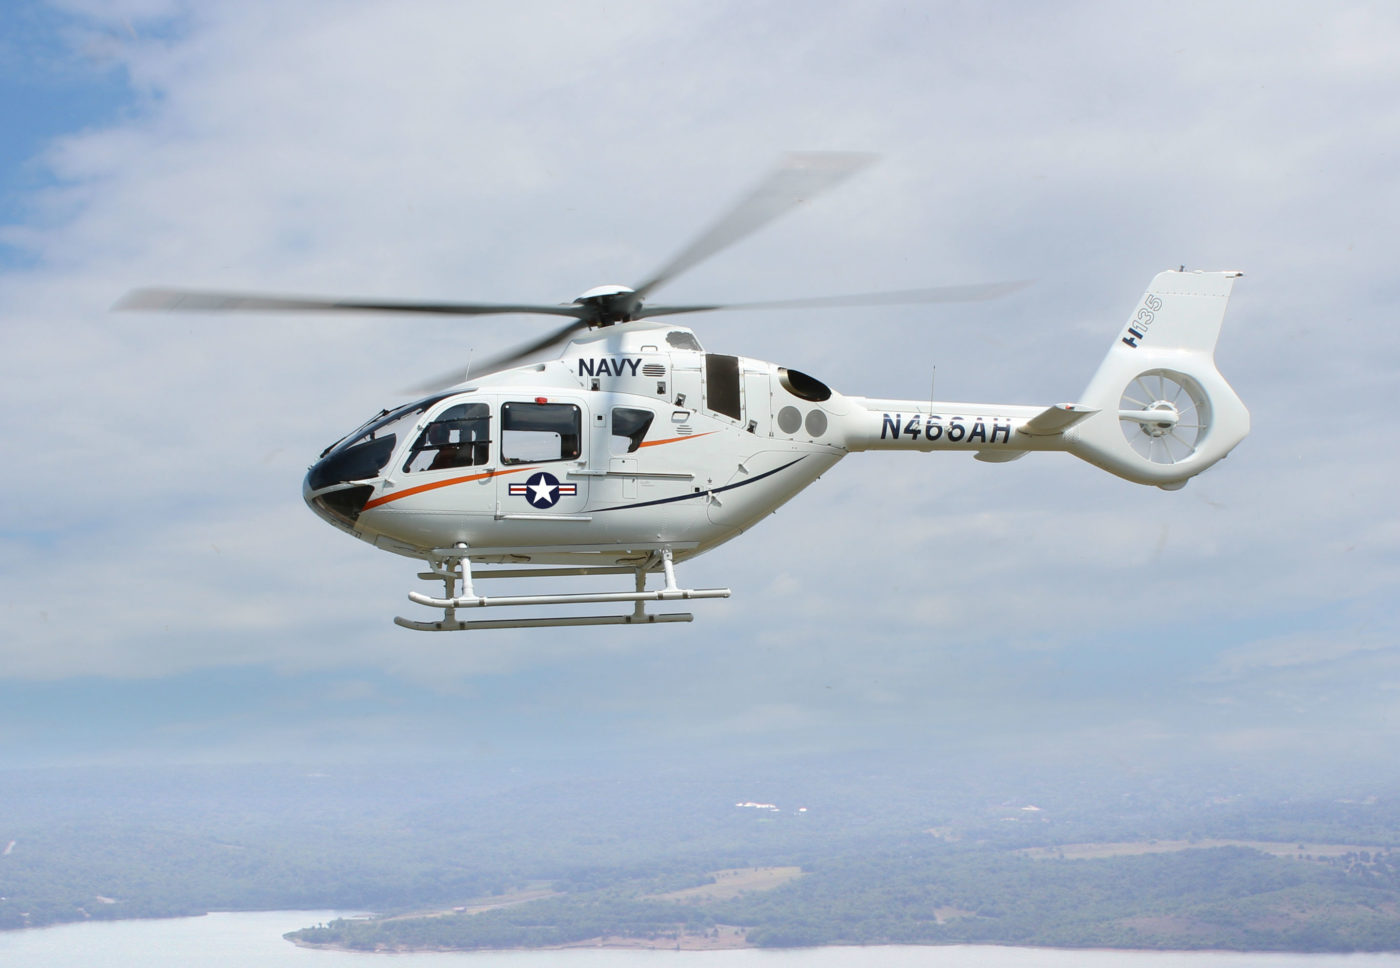 The H135 is fitted with a glass cockpit, a crash-resistant fuel system, energy absorbing seats, fuselage and landing gear. Airbus Helicopters Photo